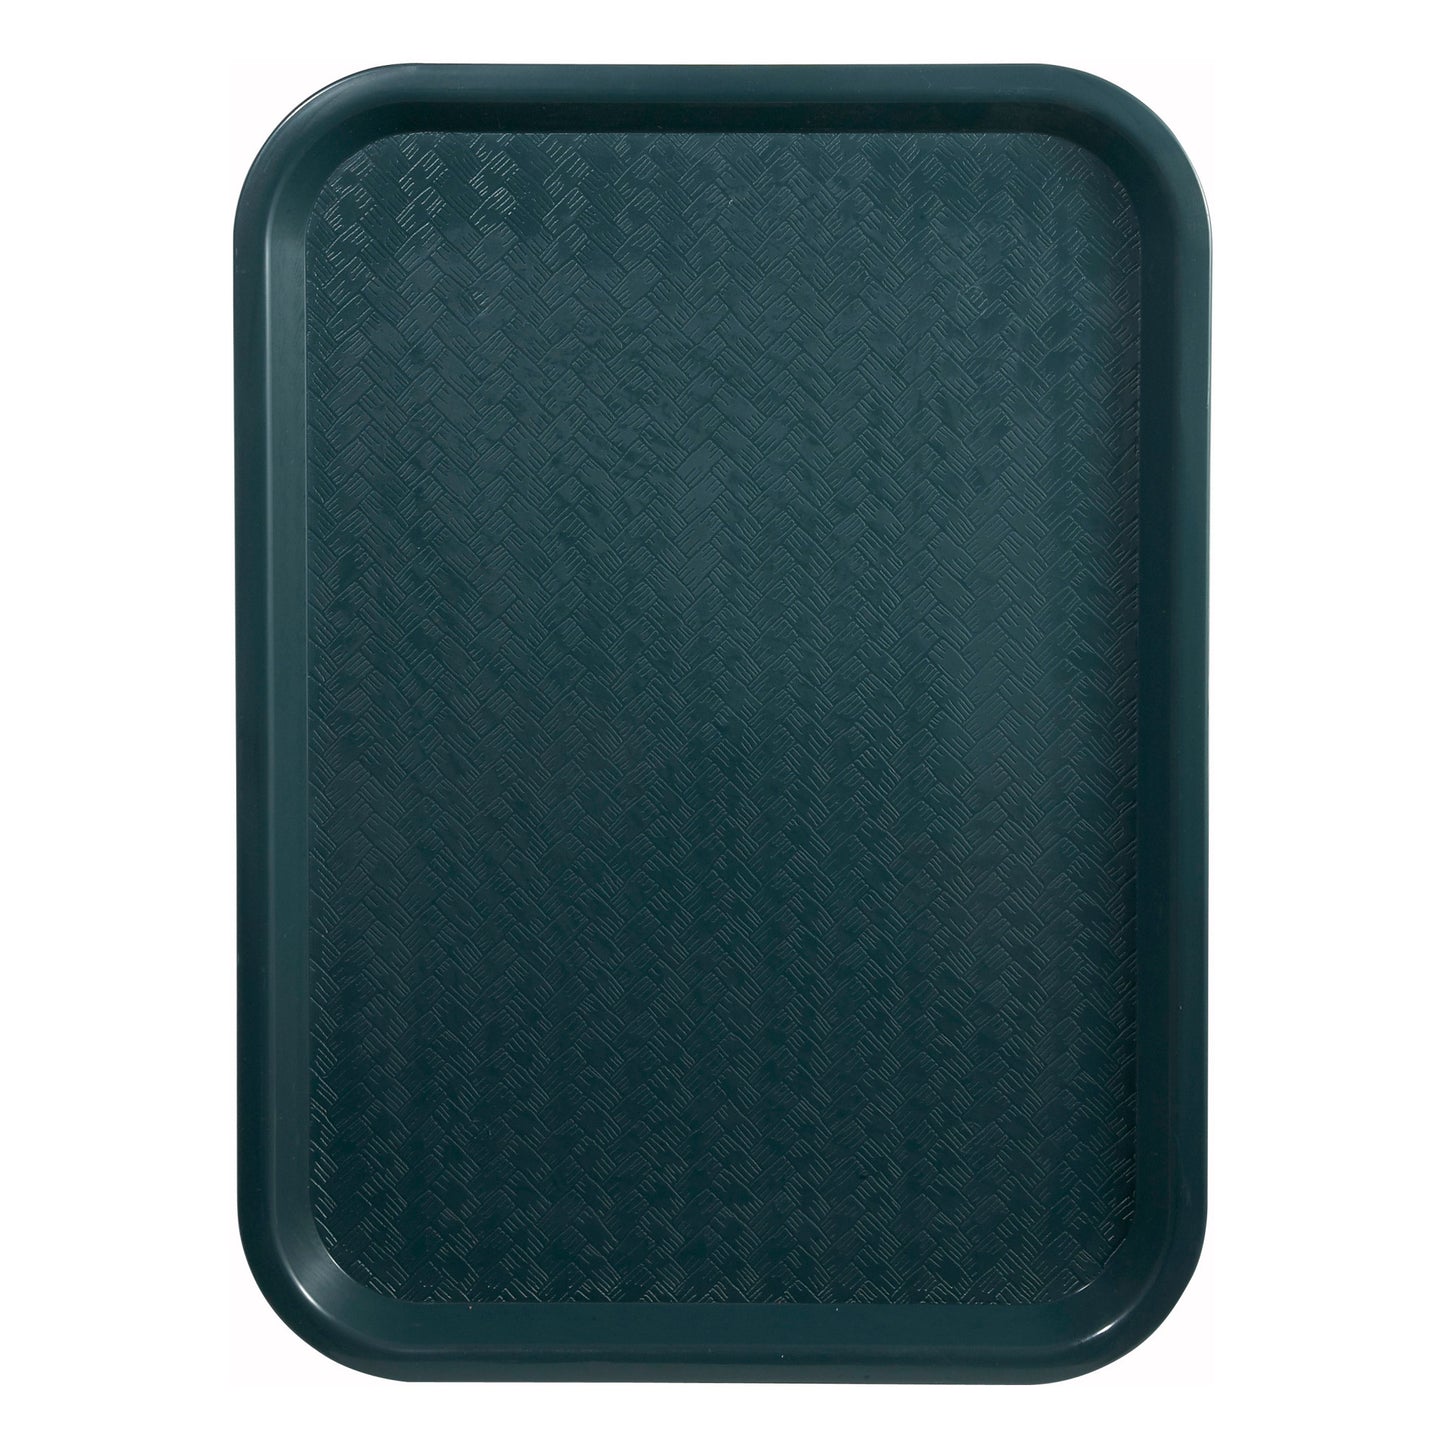 High Quality Plastic Cafeteria Tray - 12 x 16, Green